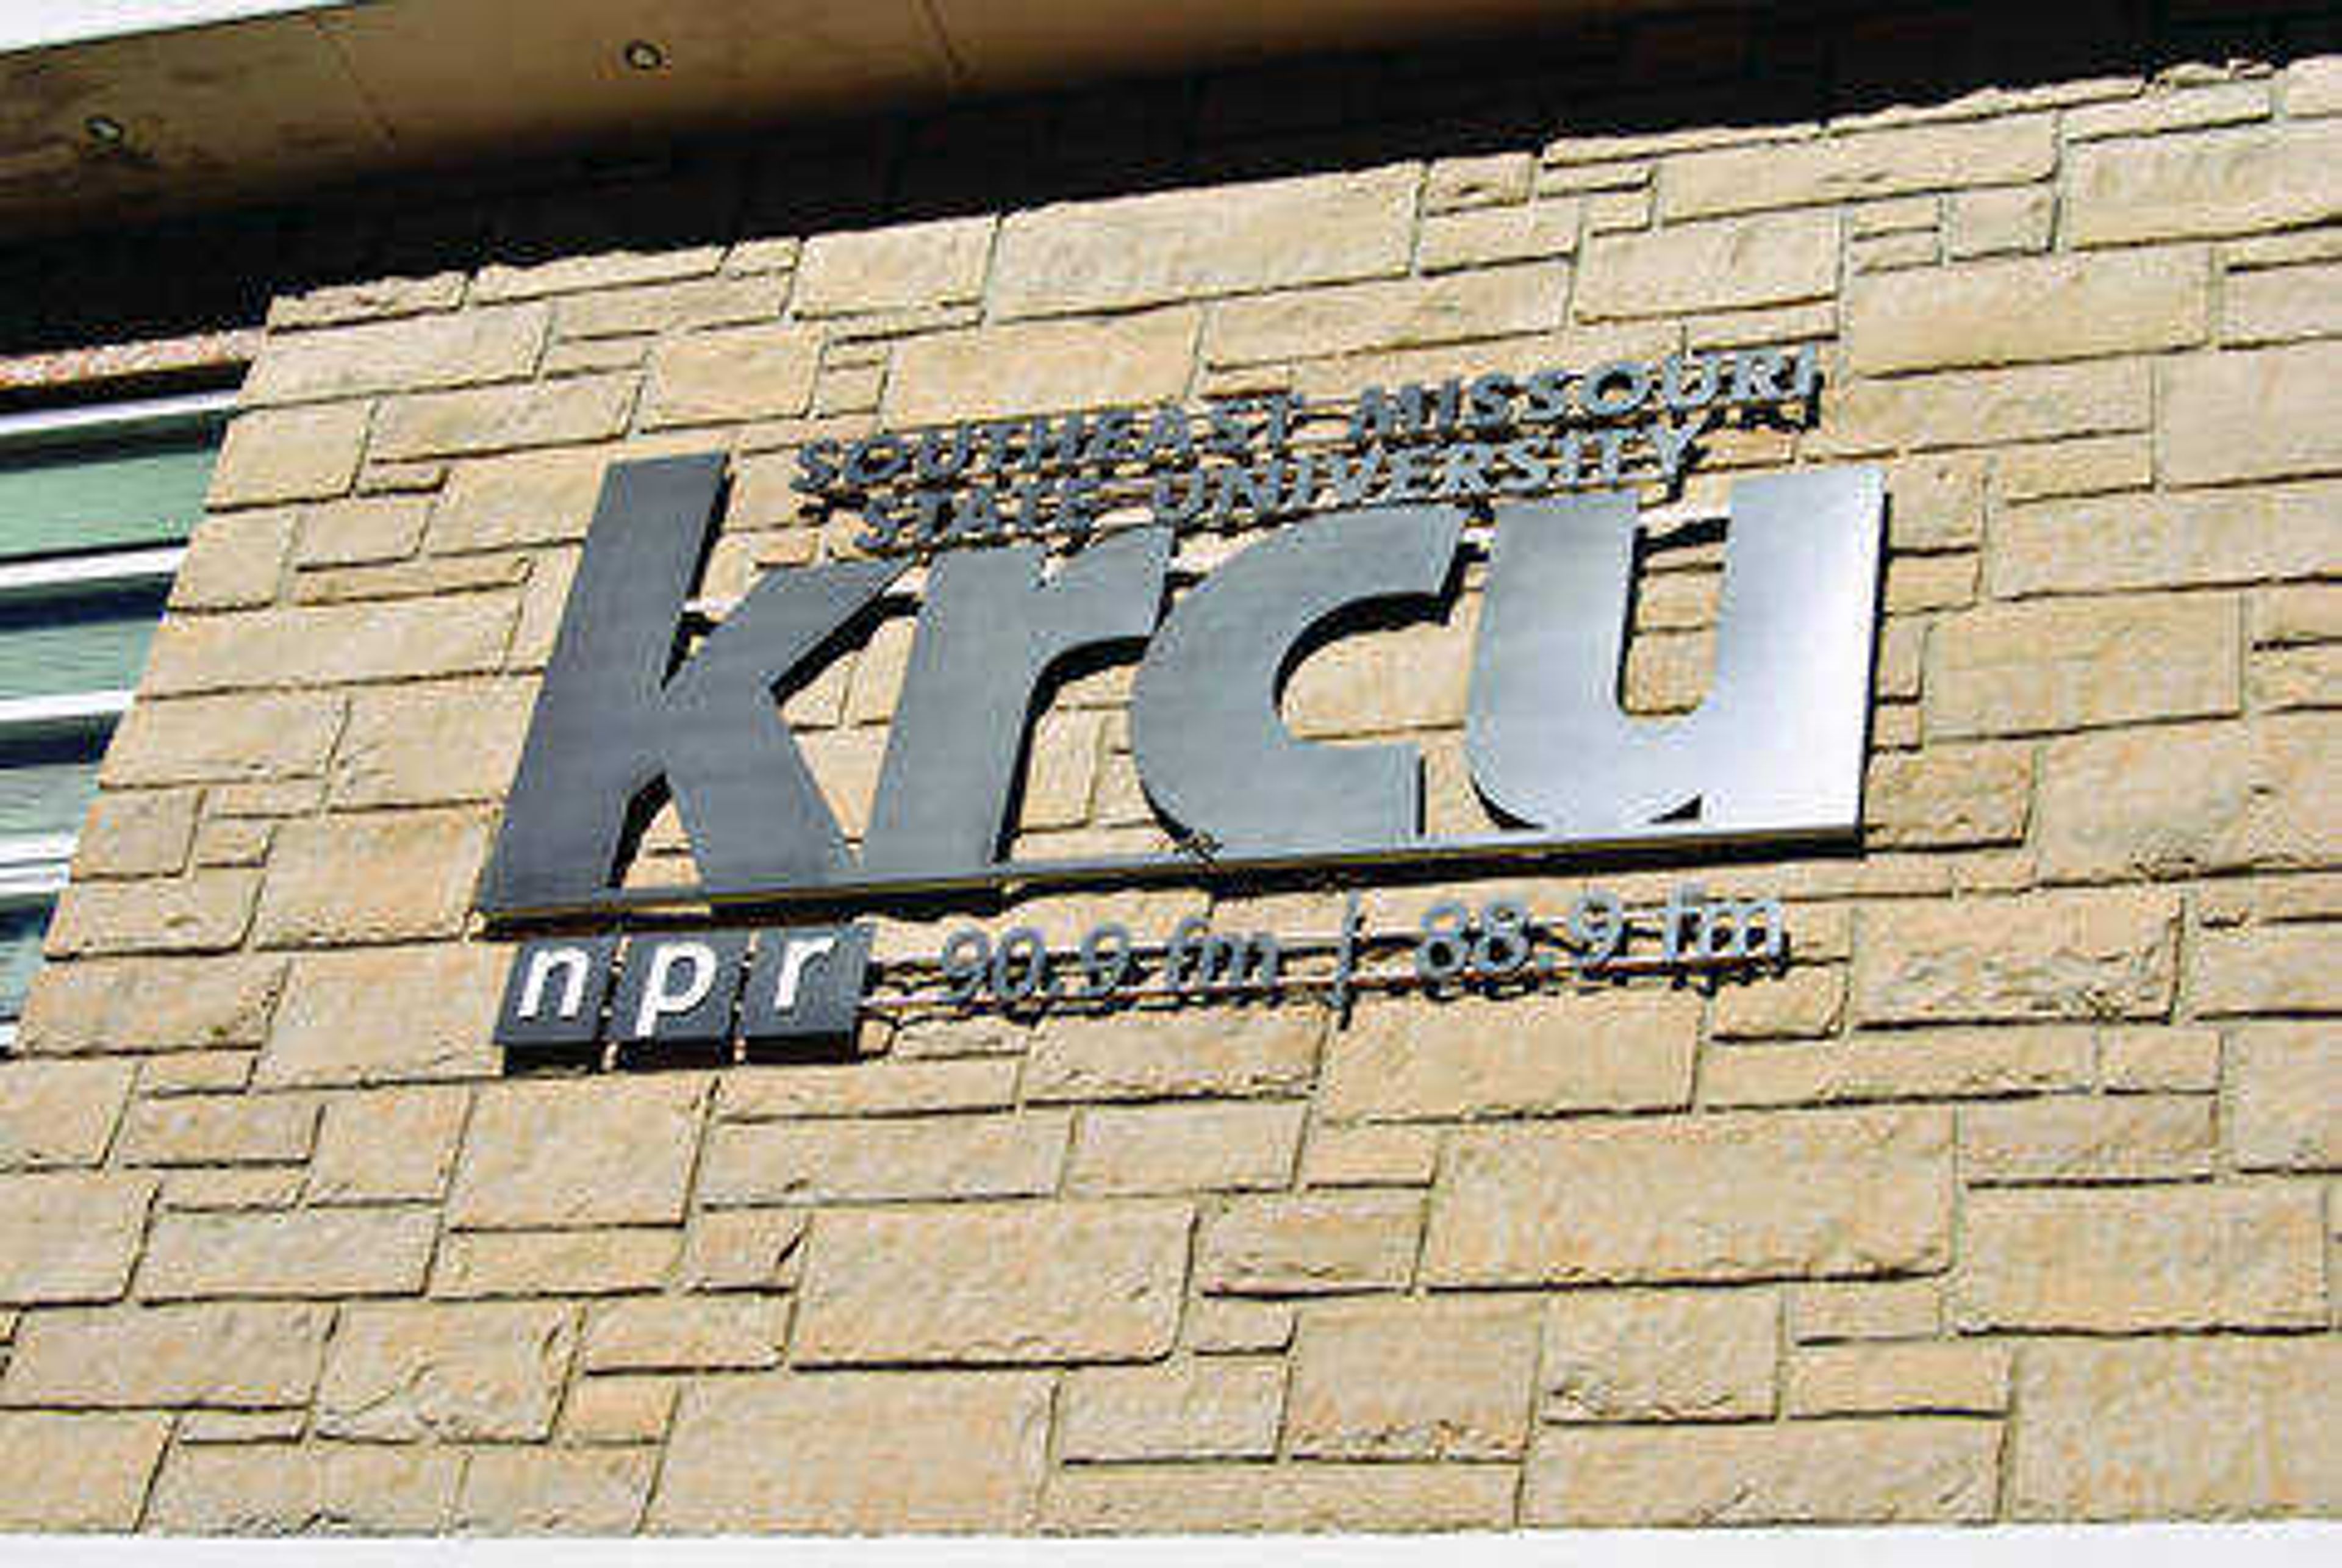 KRCU 90.9/88.9 FM will be celebrating Valentine's Day on Friday with its "A Little Love & Luck" event. Arrow file photo.